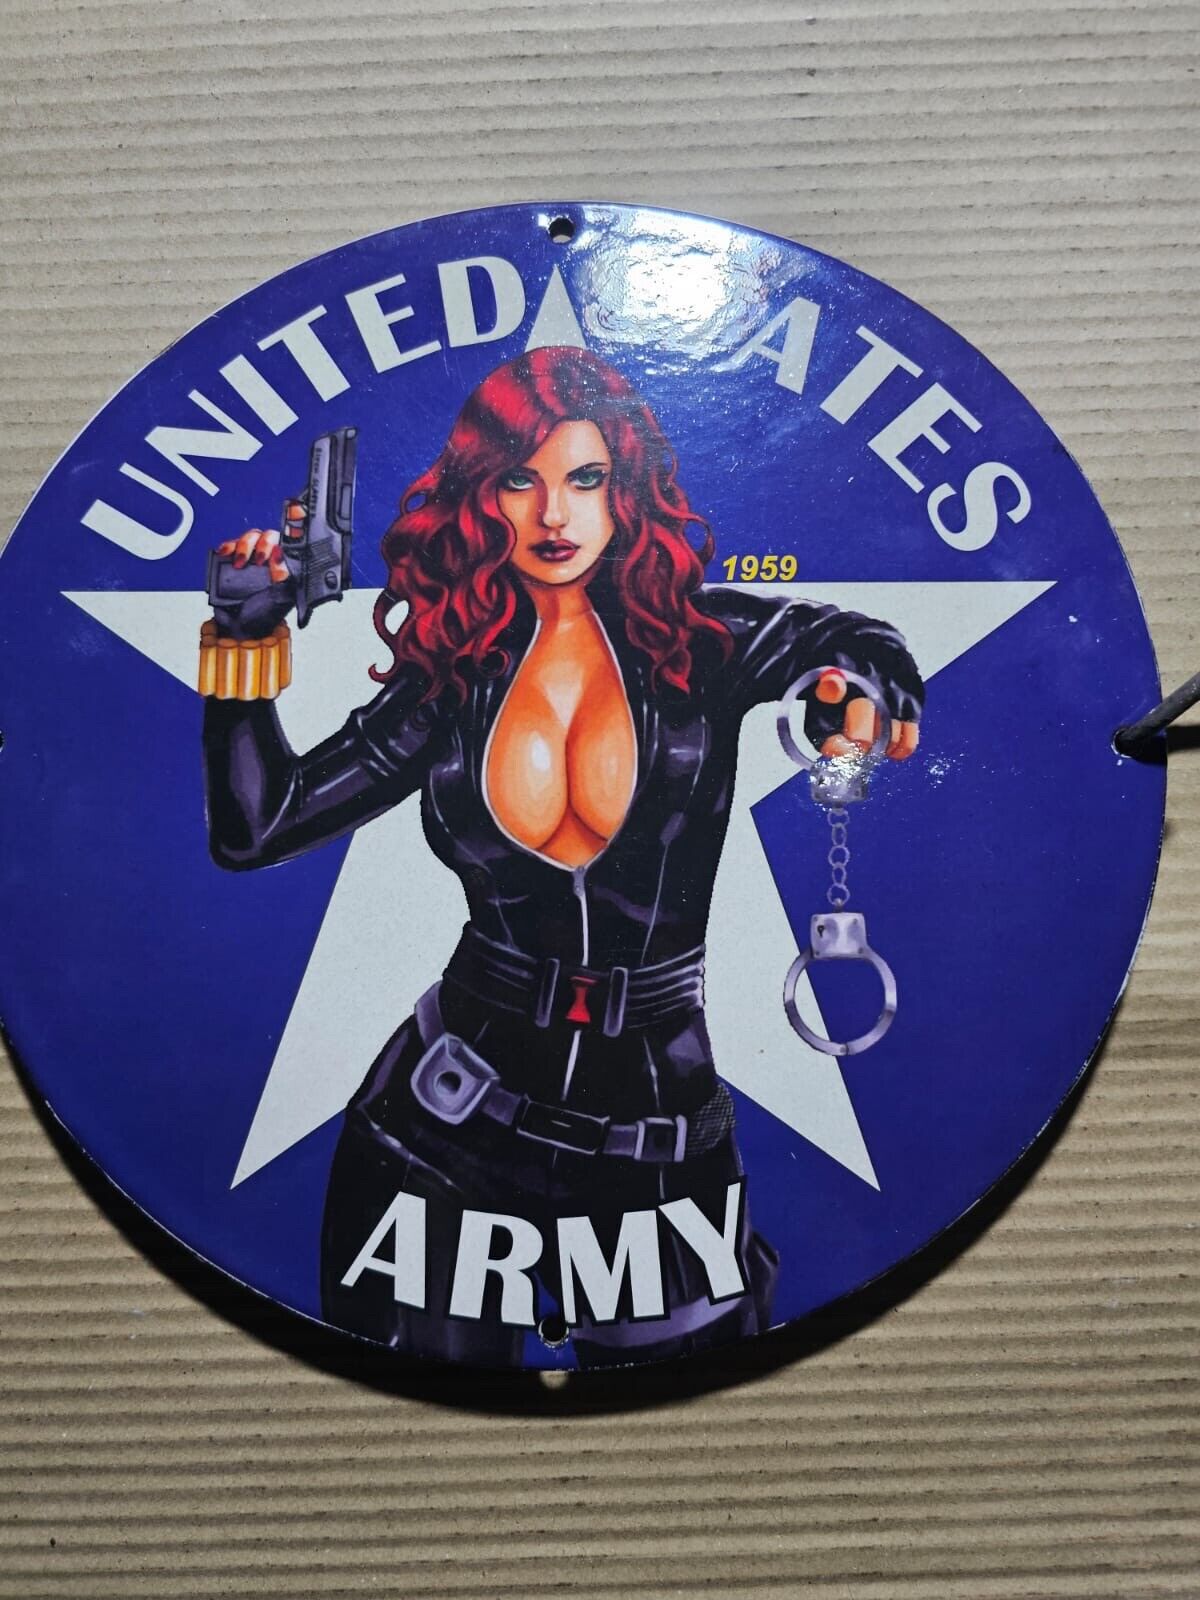 CLASSIC UNITED STATES ARMY GARAGE SEXY GIRL PINUP PORCELAIN ENAMEL SIGN.